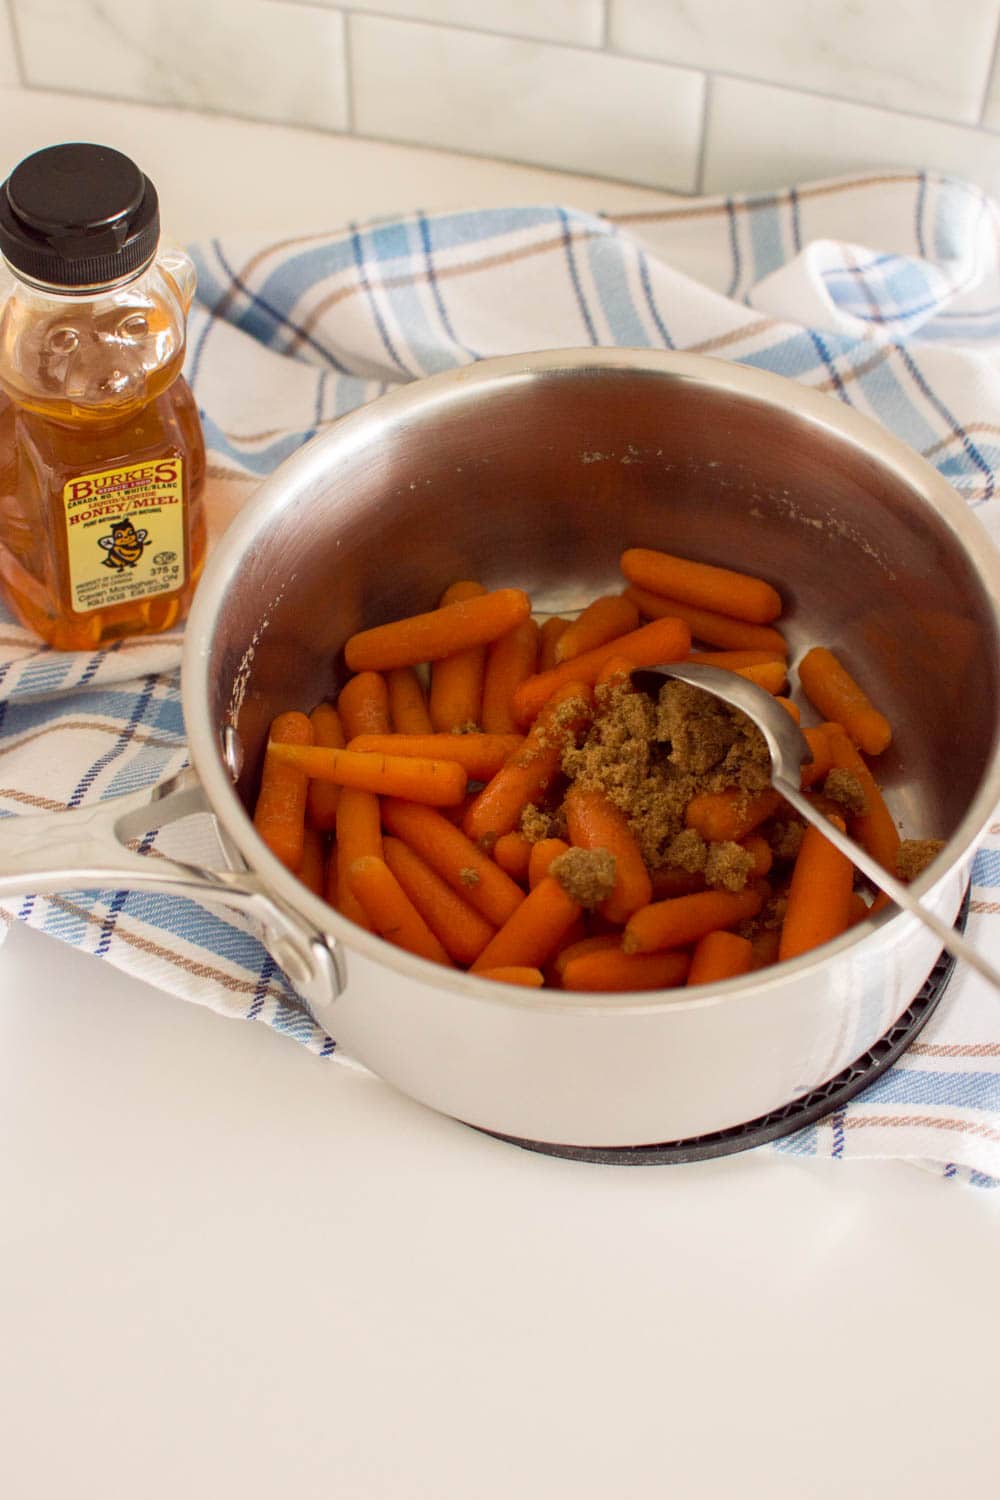 Adding brown sugar and honey into boiled baby carrots